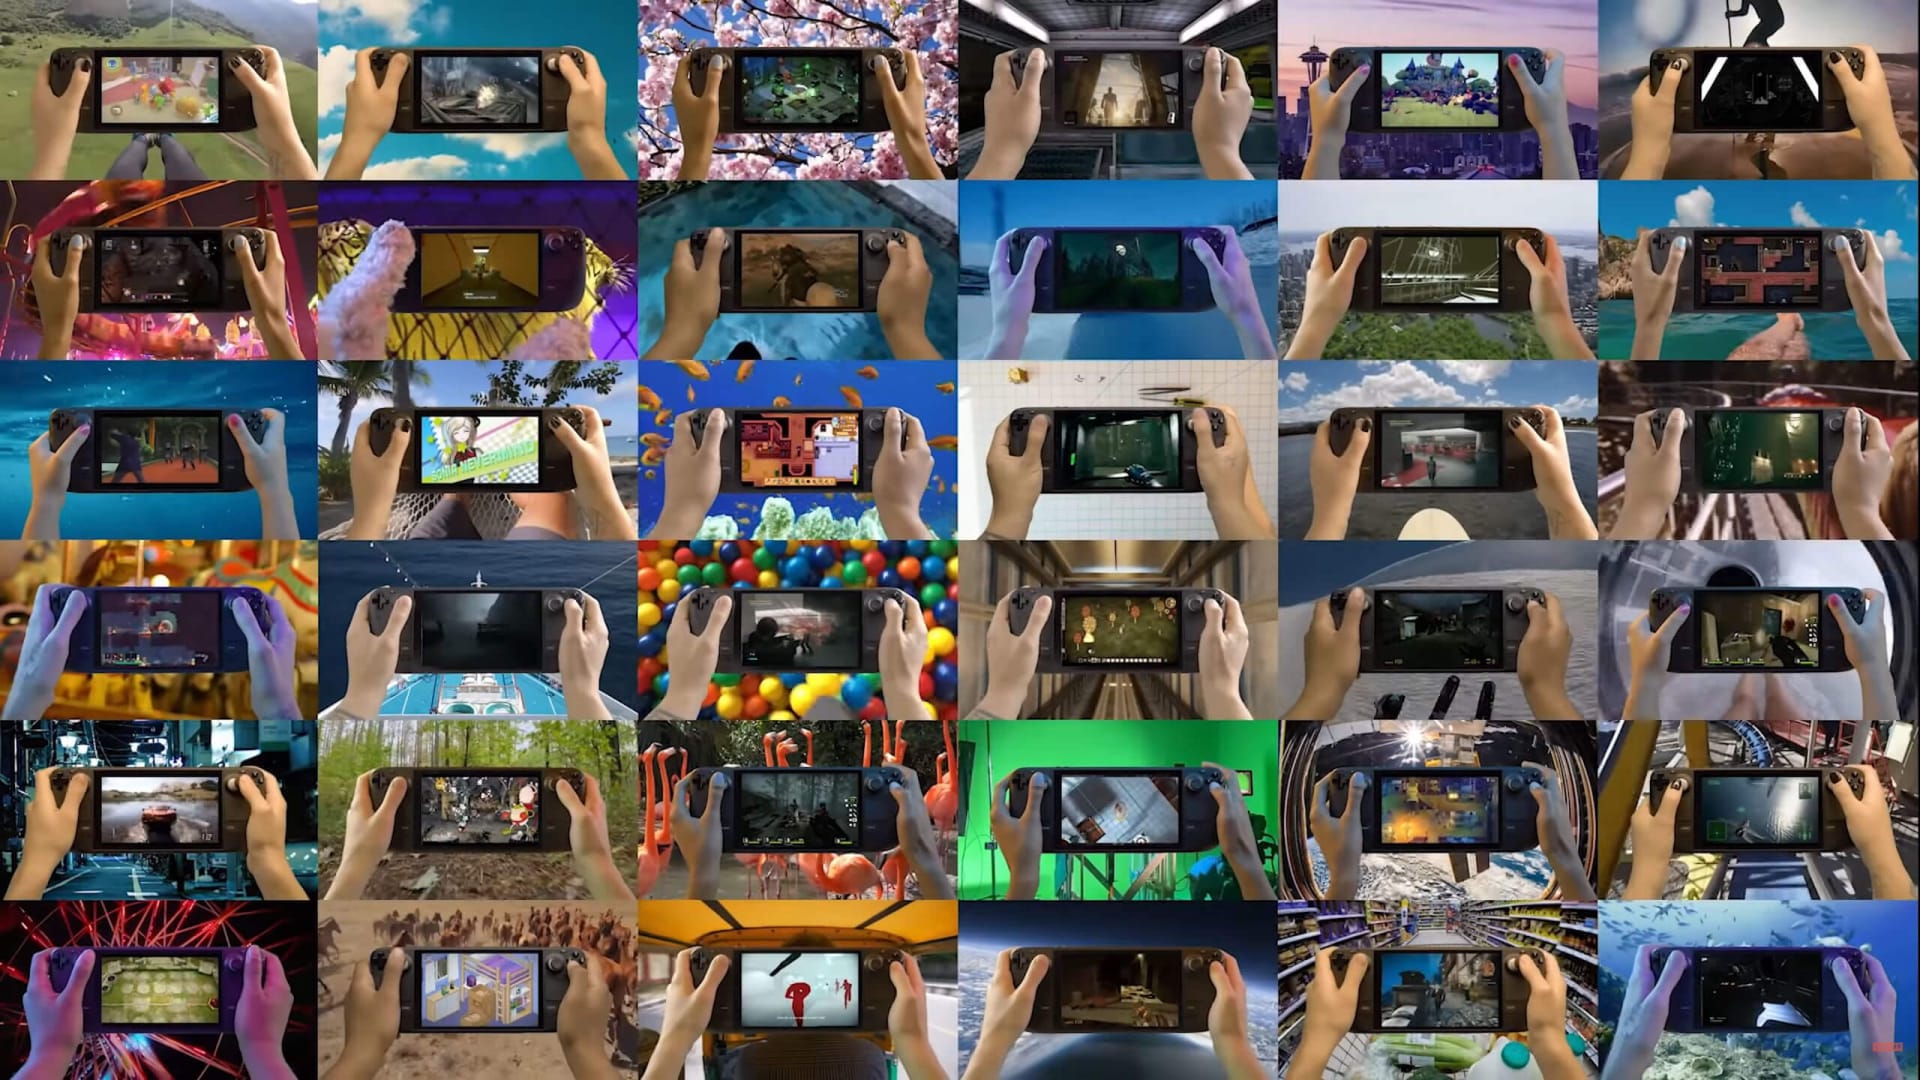 A tiled image depicting many people playing Steam Decks in different settings